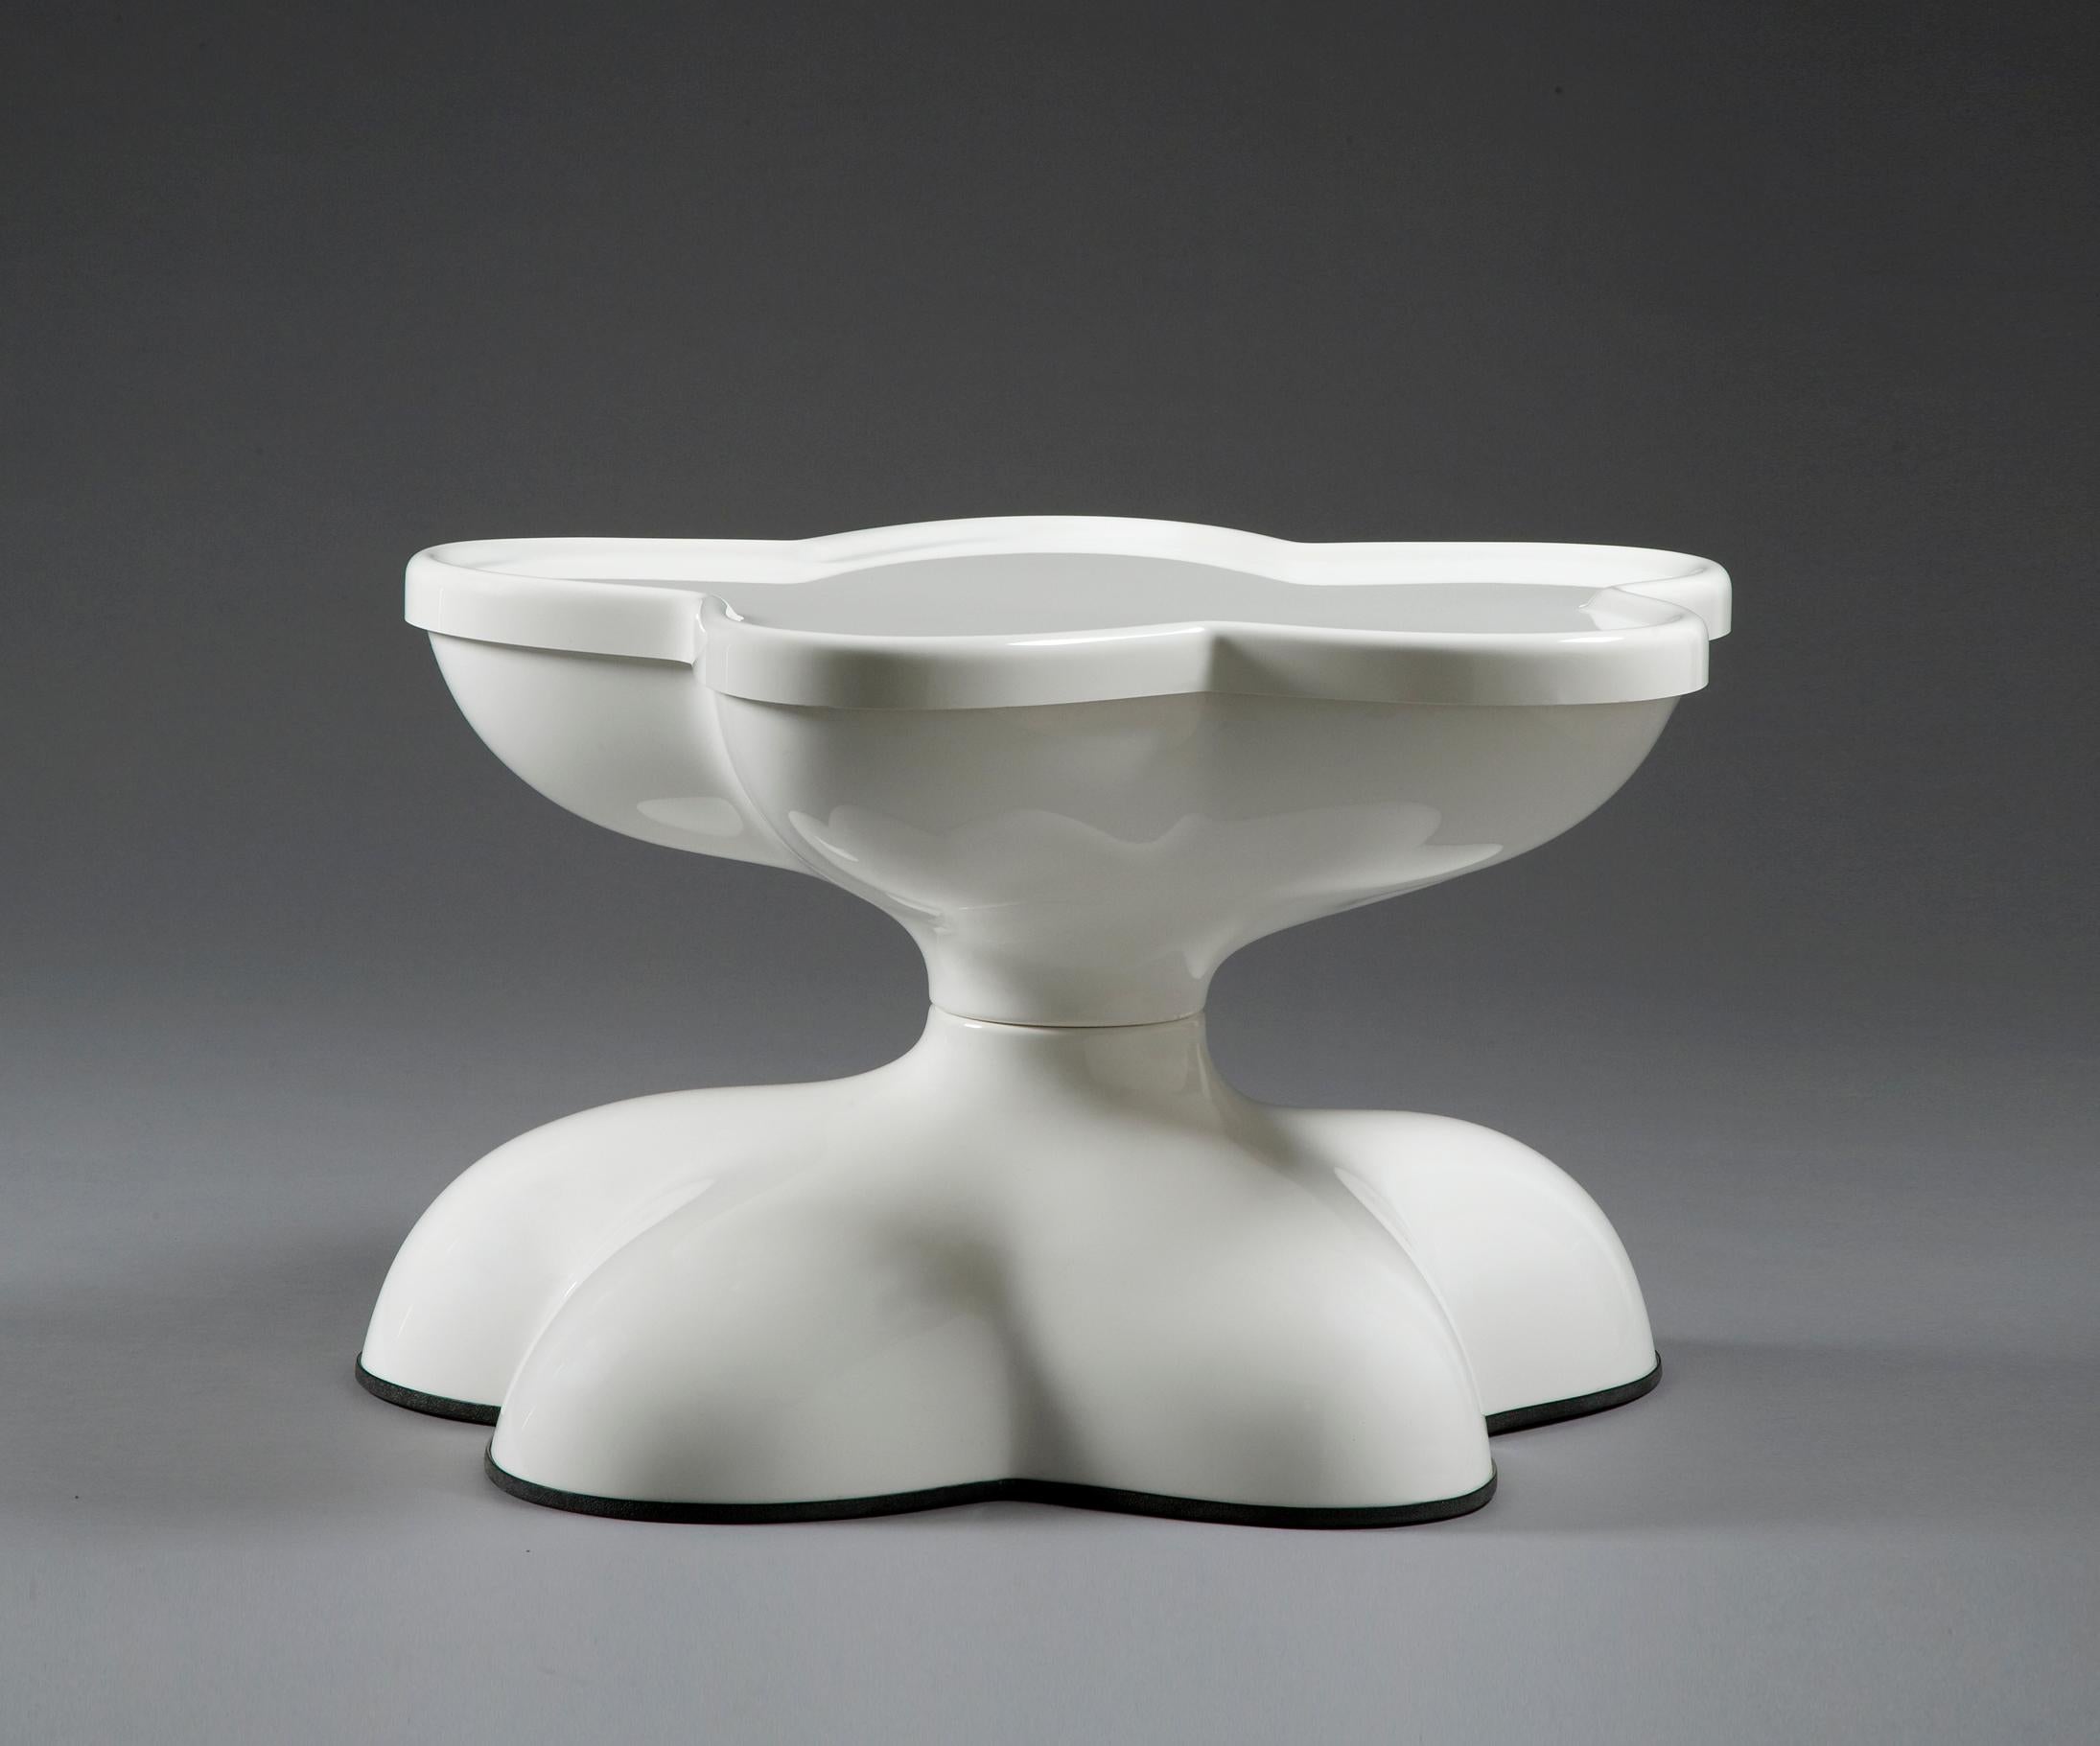 Made to order white molar swivel coffee table in white gel-coated, fiberglass-reinforced plastic. Designed by Wendell Castle, Rochester, New York, 1969.

Please inquire for exact measurements.